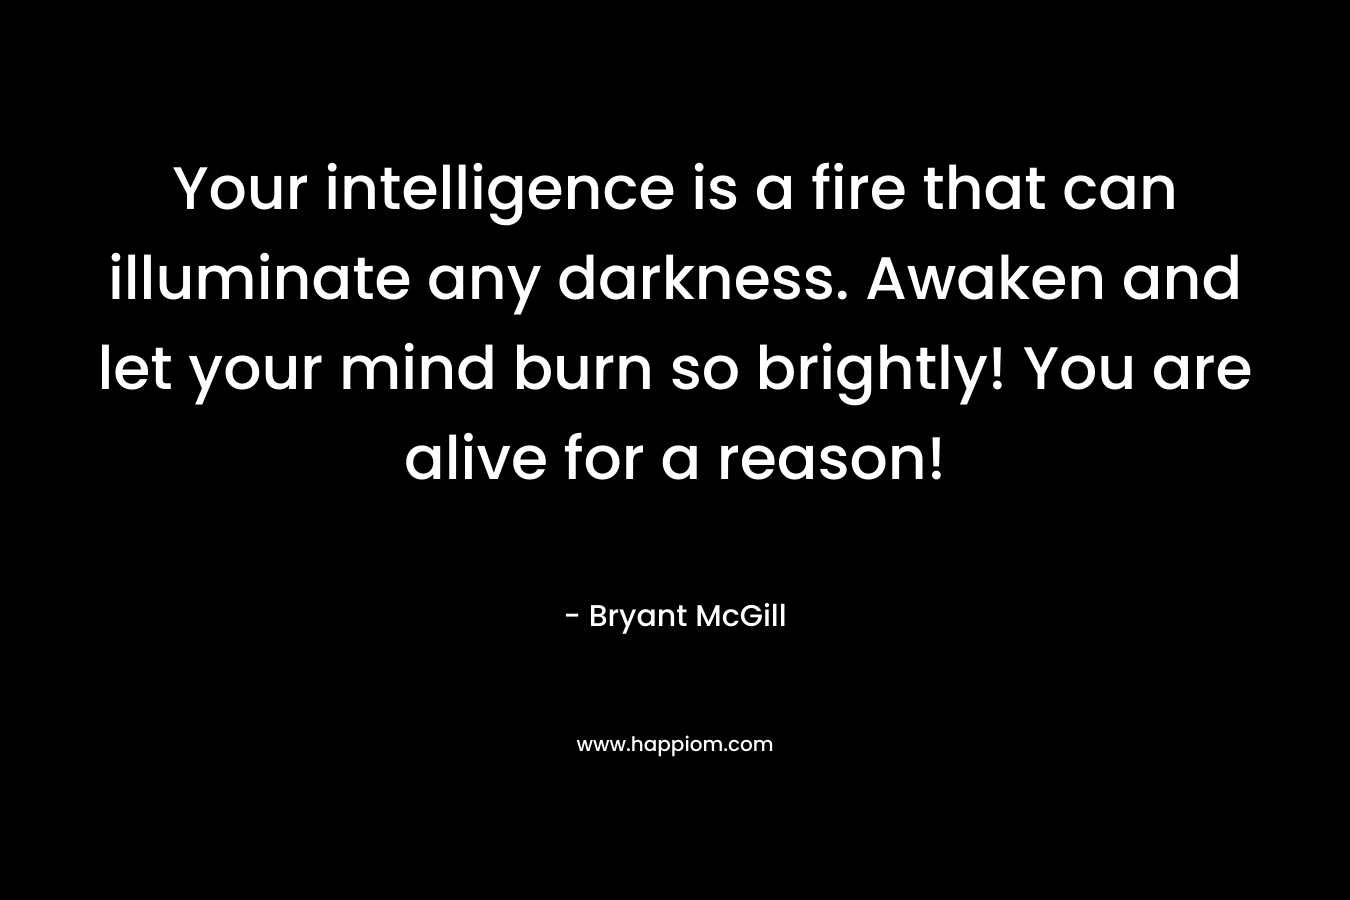 Your intelligence is a fire that can illuminate any darkness. Awaken and let your mind burn so brightly! You are alive for a reason! – Bryant McGill